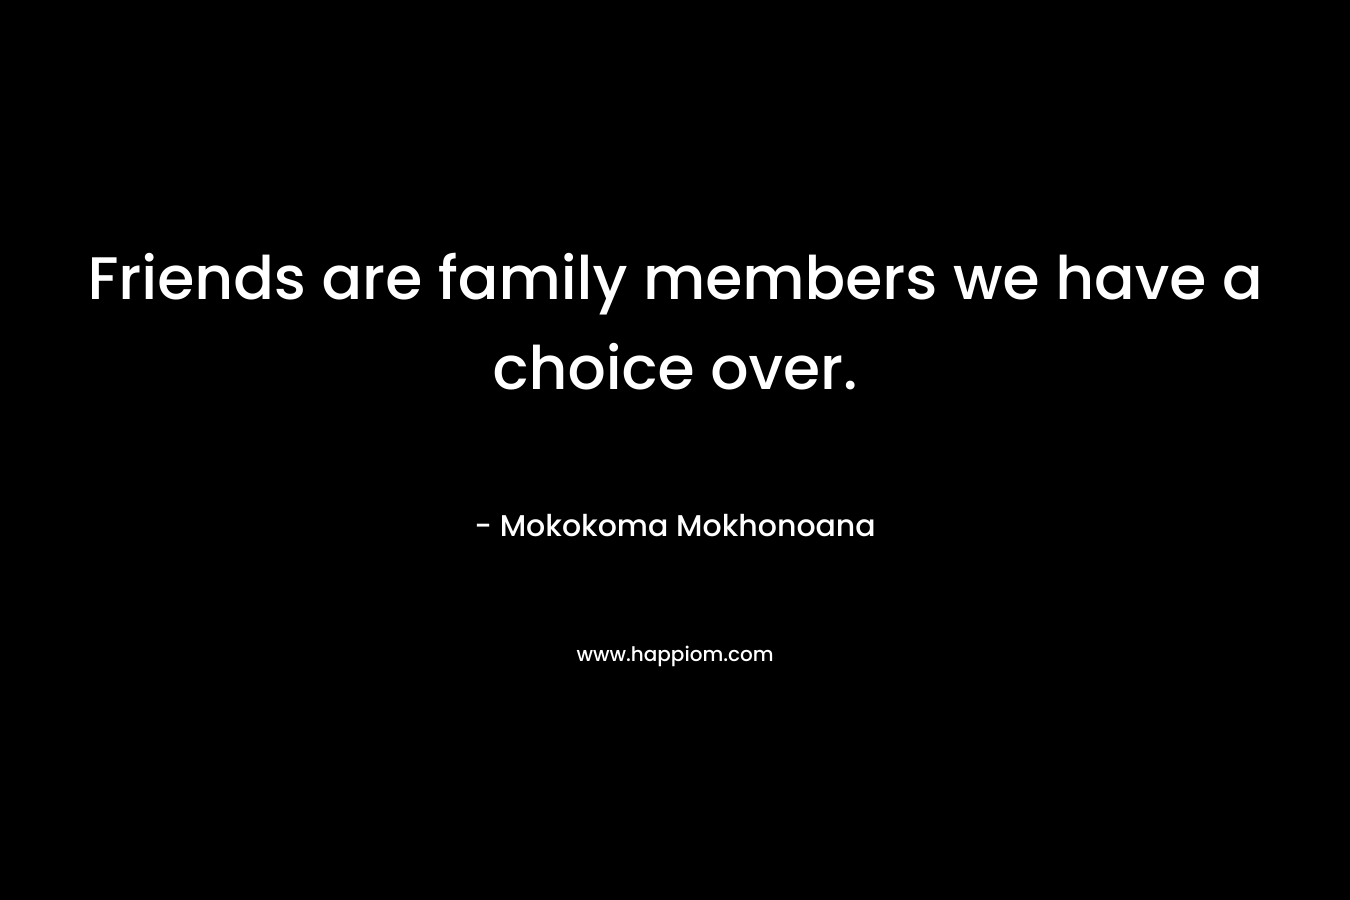 Friends are family members we have a choice over.